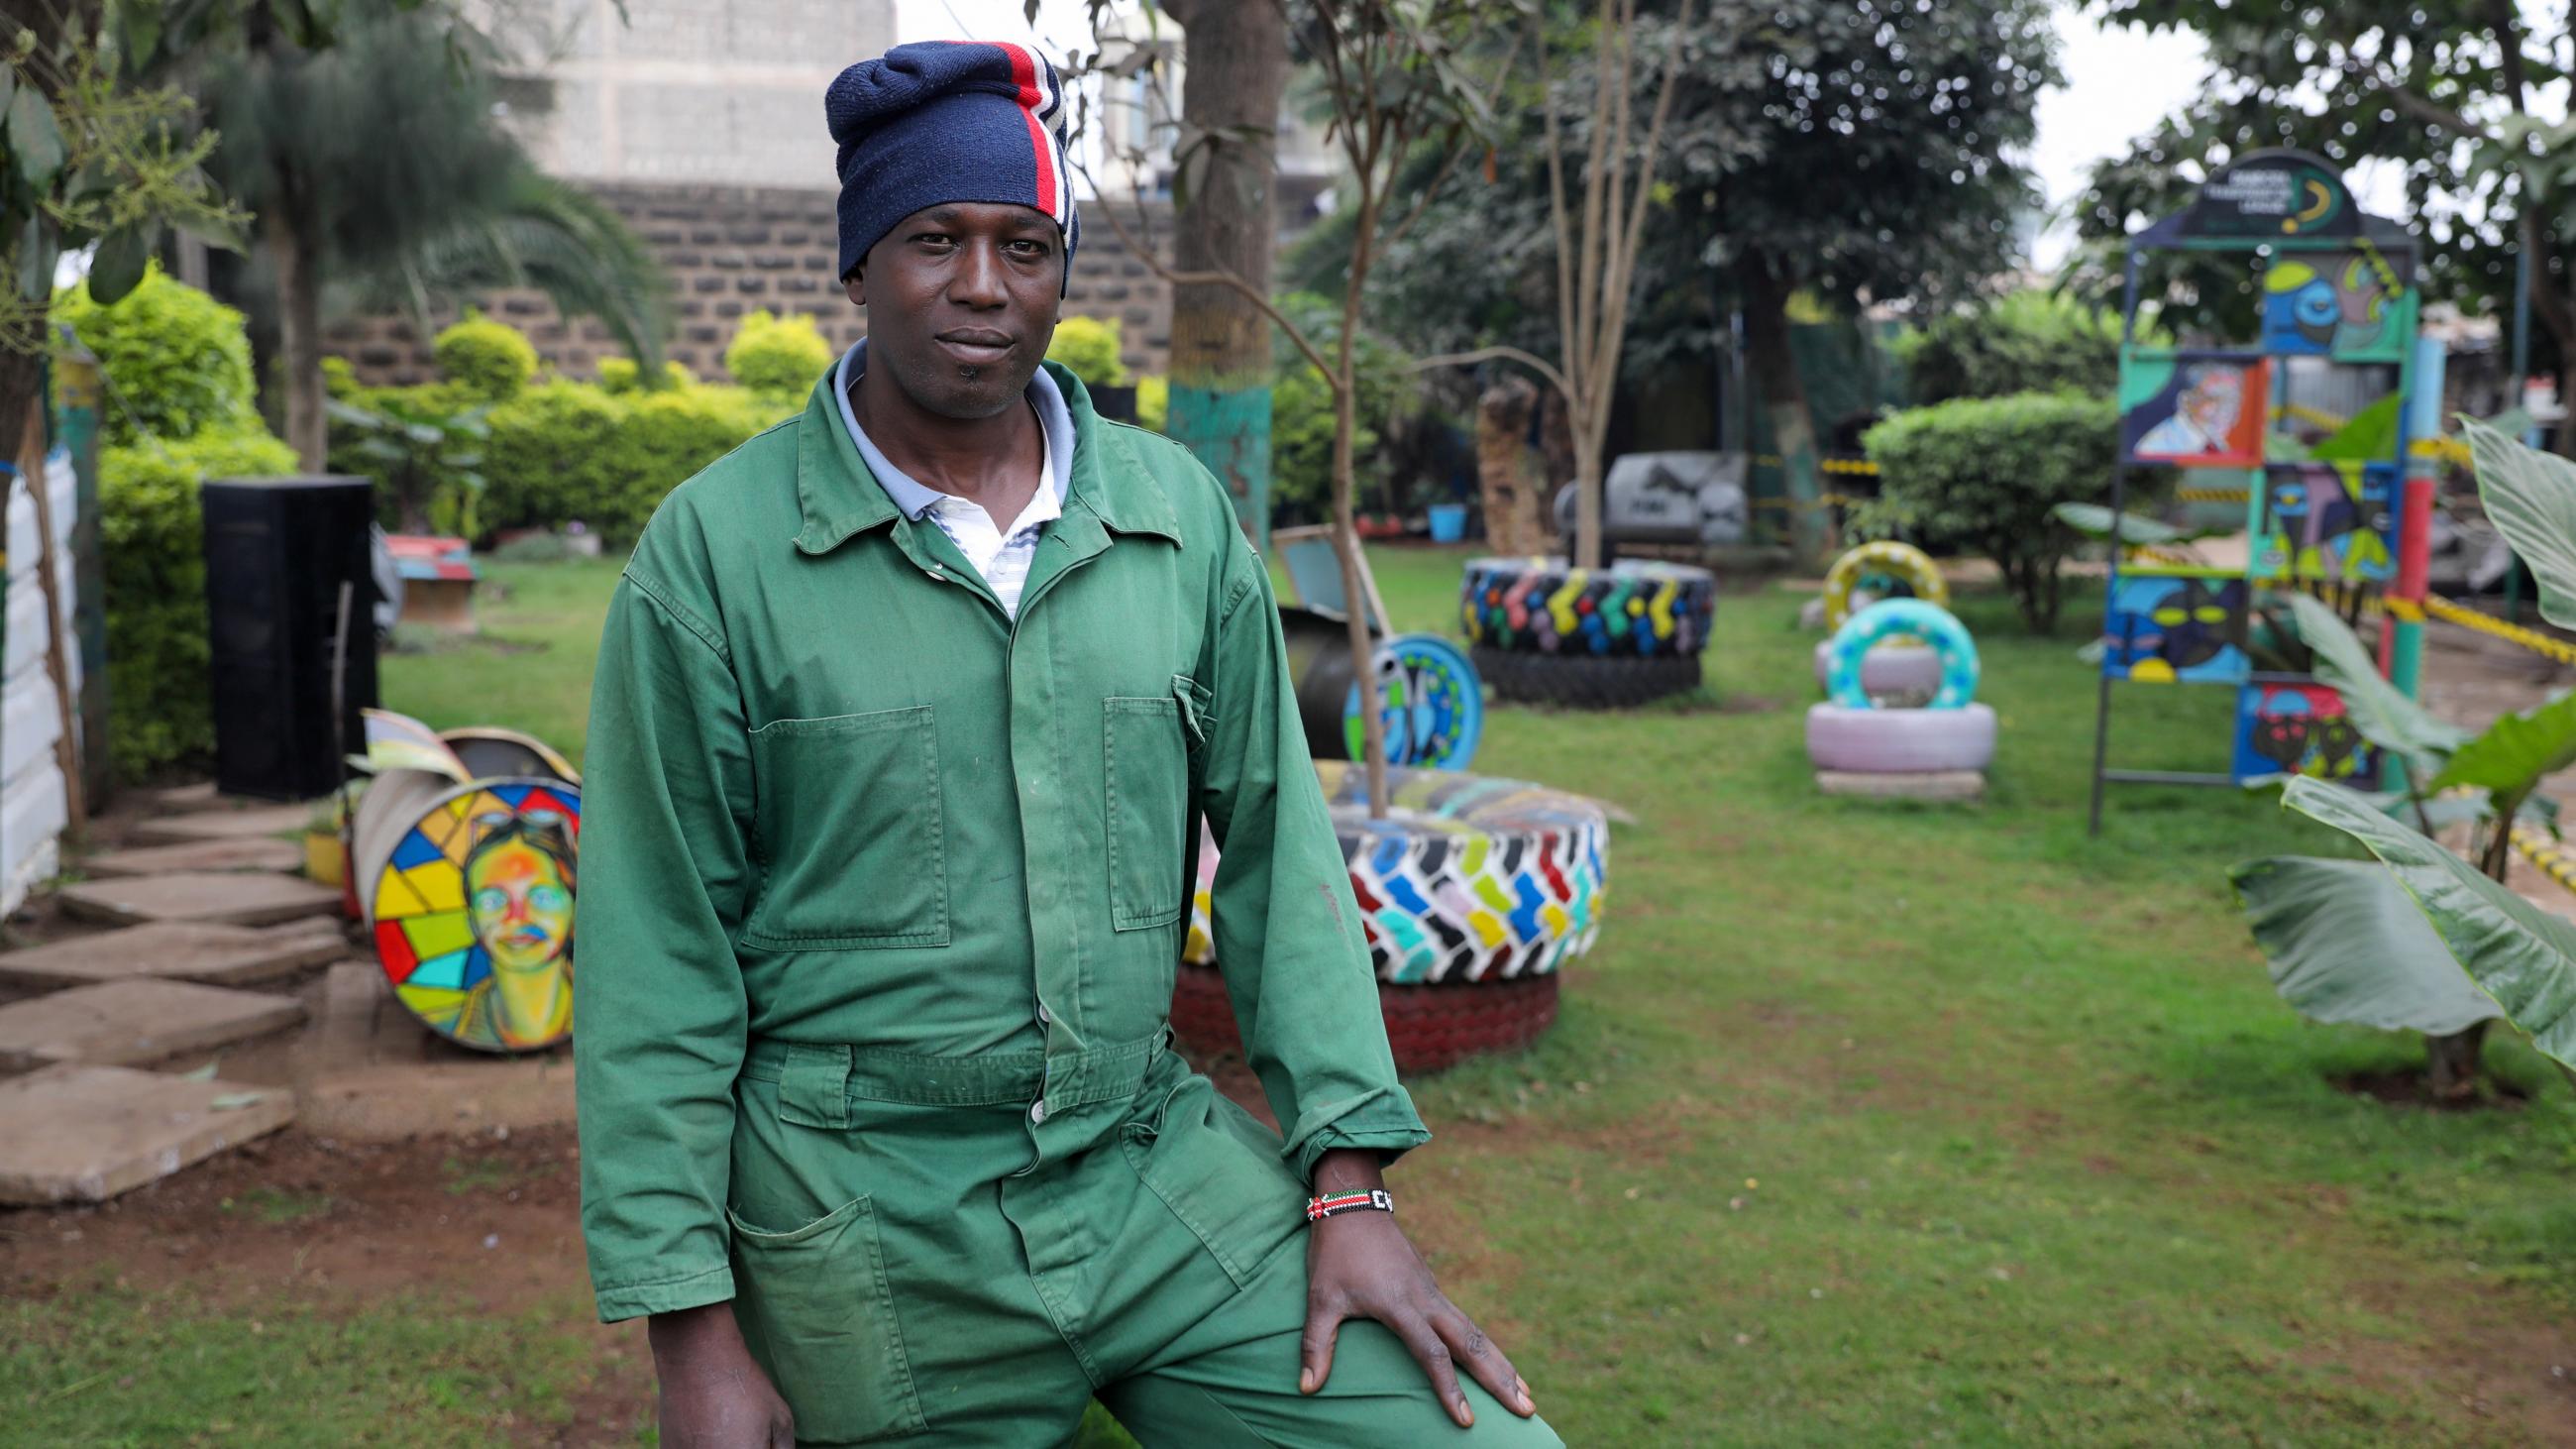 Charles Gachanga CEO of the Dandora transformation league, poses for a photo in a community garden, in the Dandora suburb of Nairobi, Kenya, August 6, 2021.